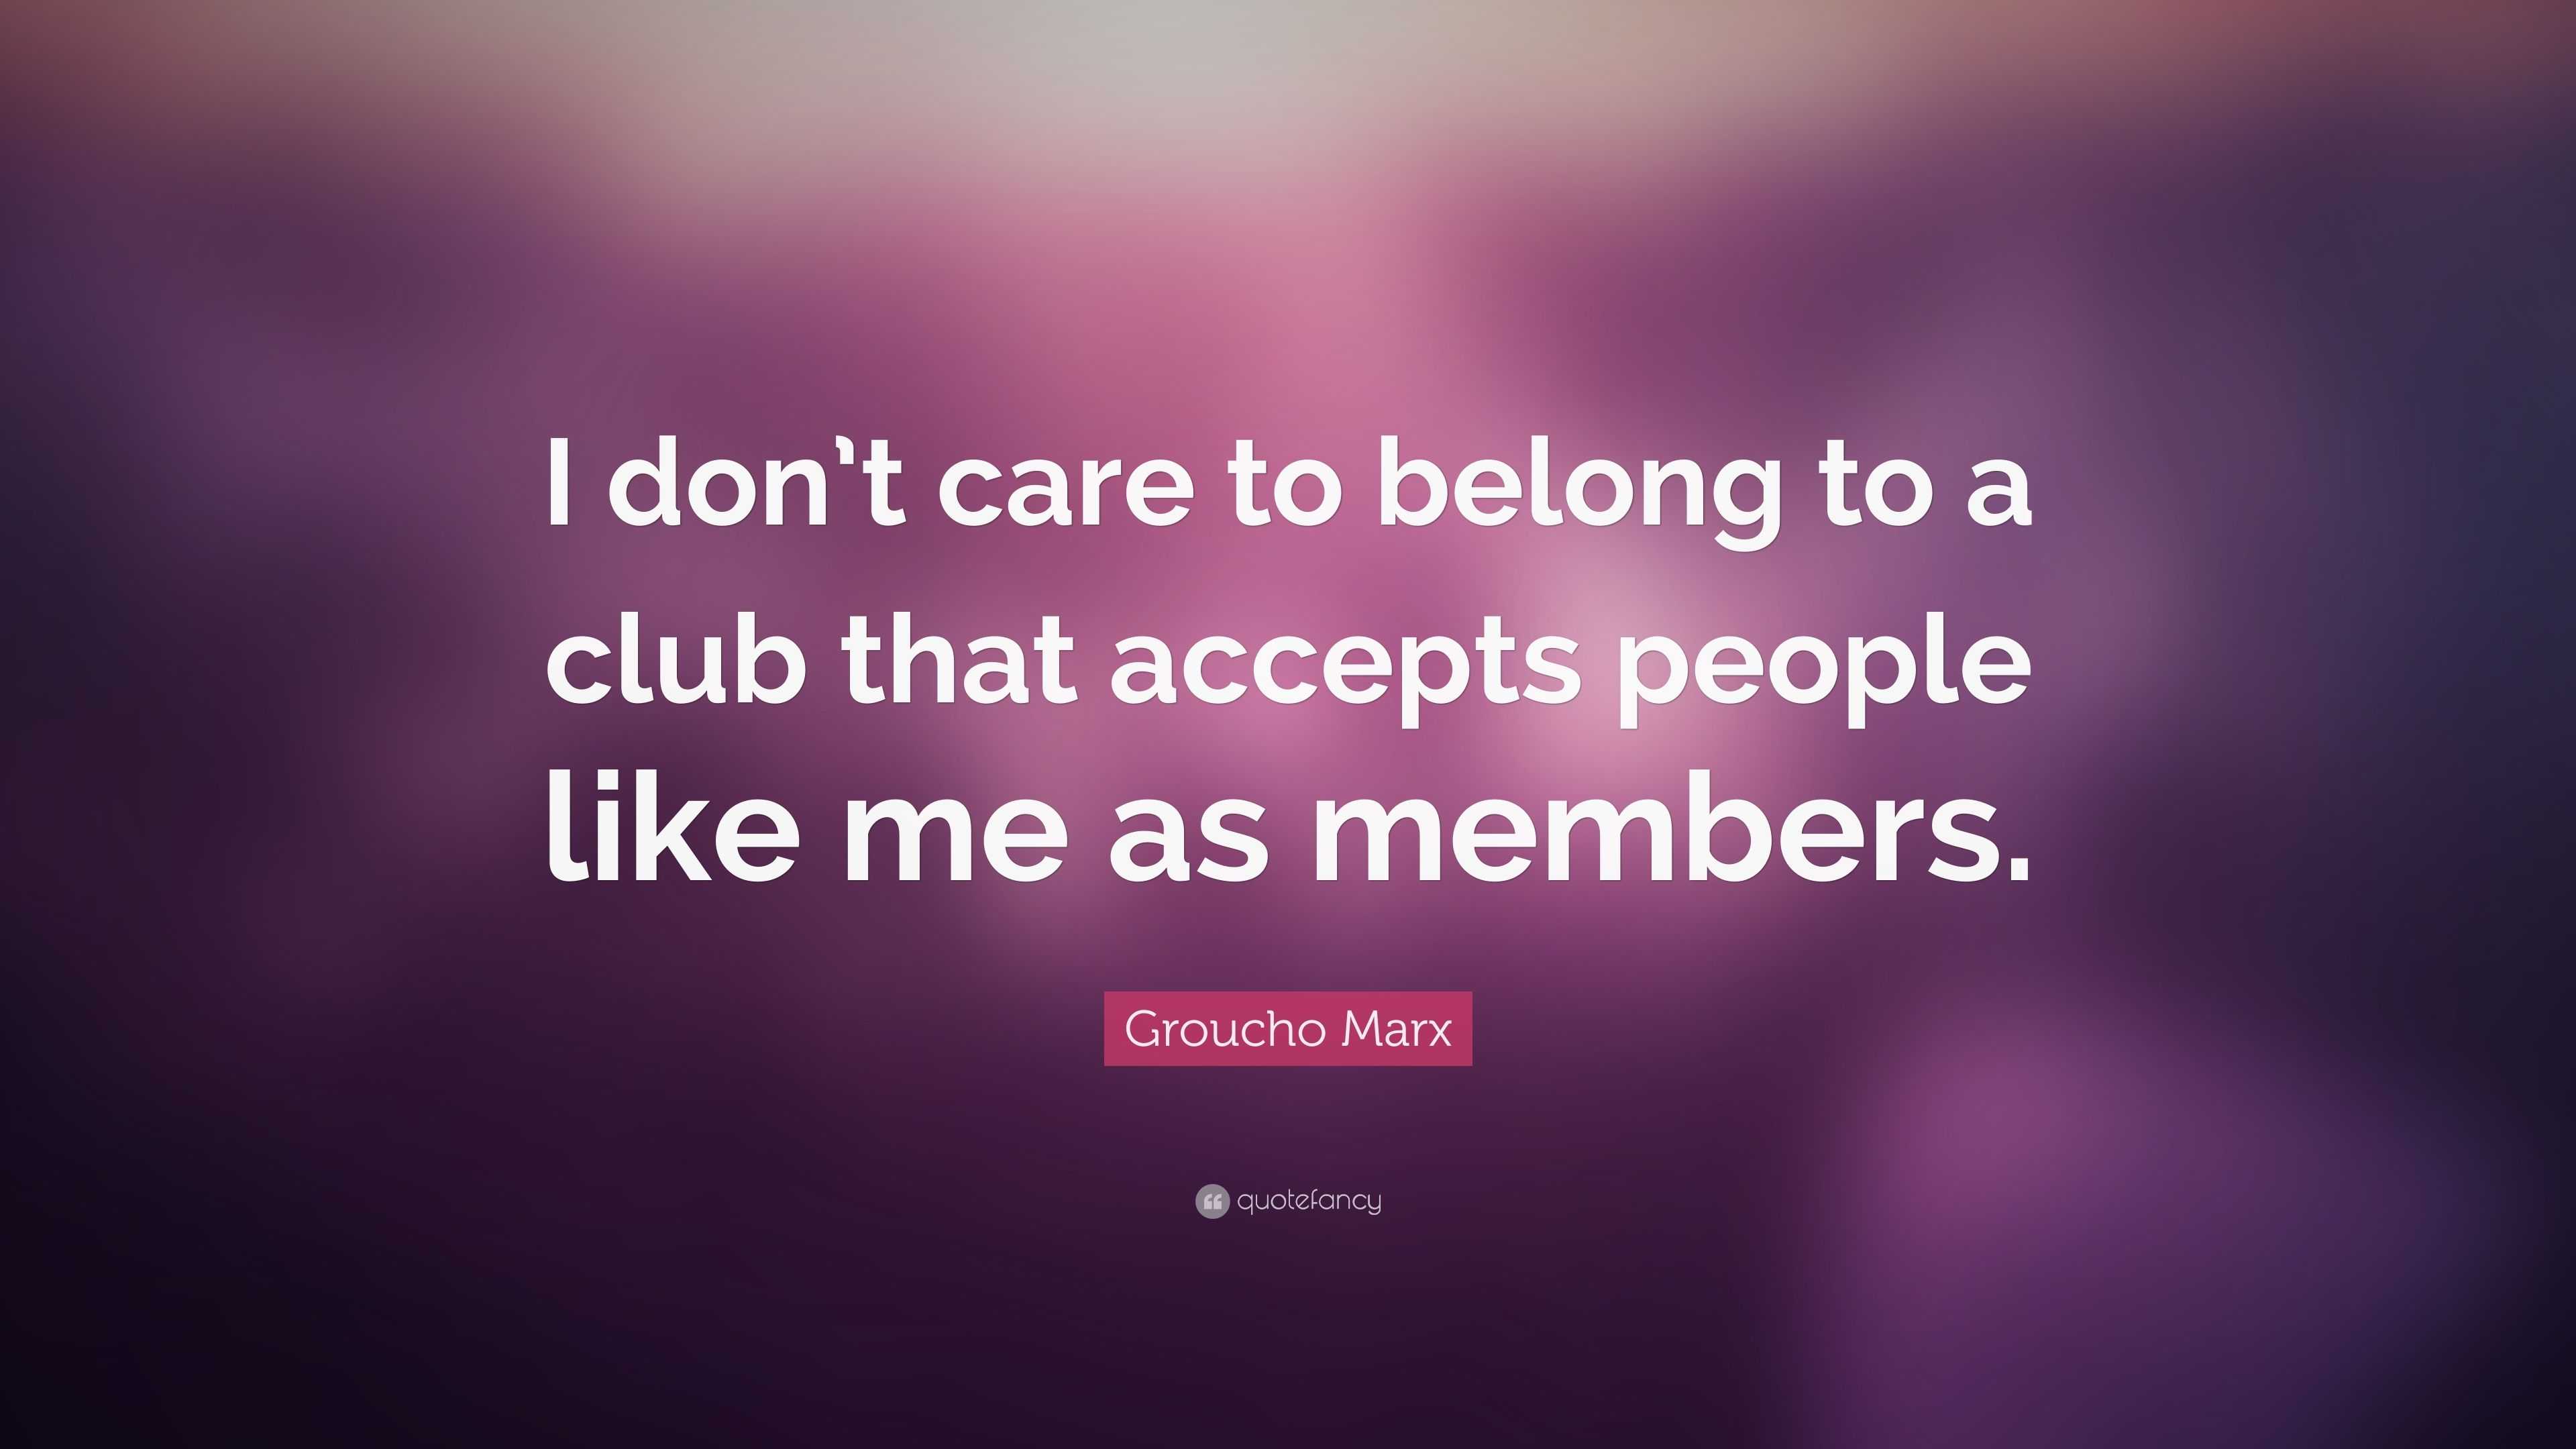 Groucho Marx Quote: “I don't care to belong to a club that accepts people  like